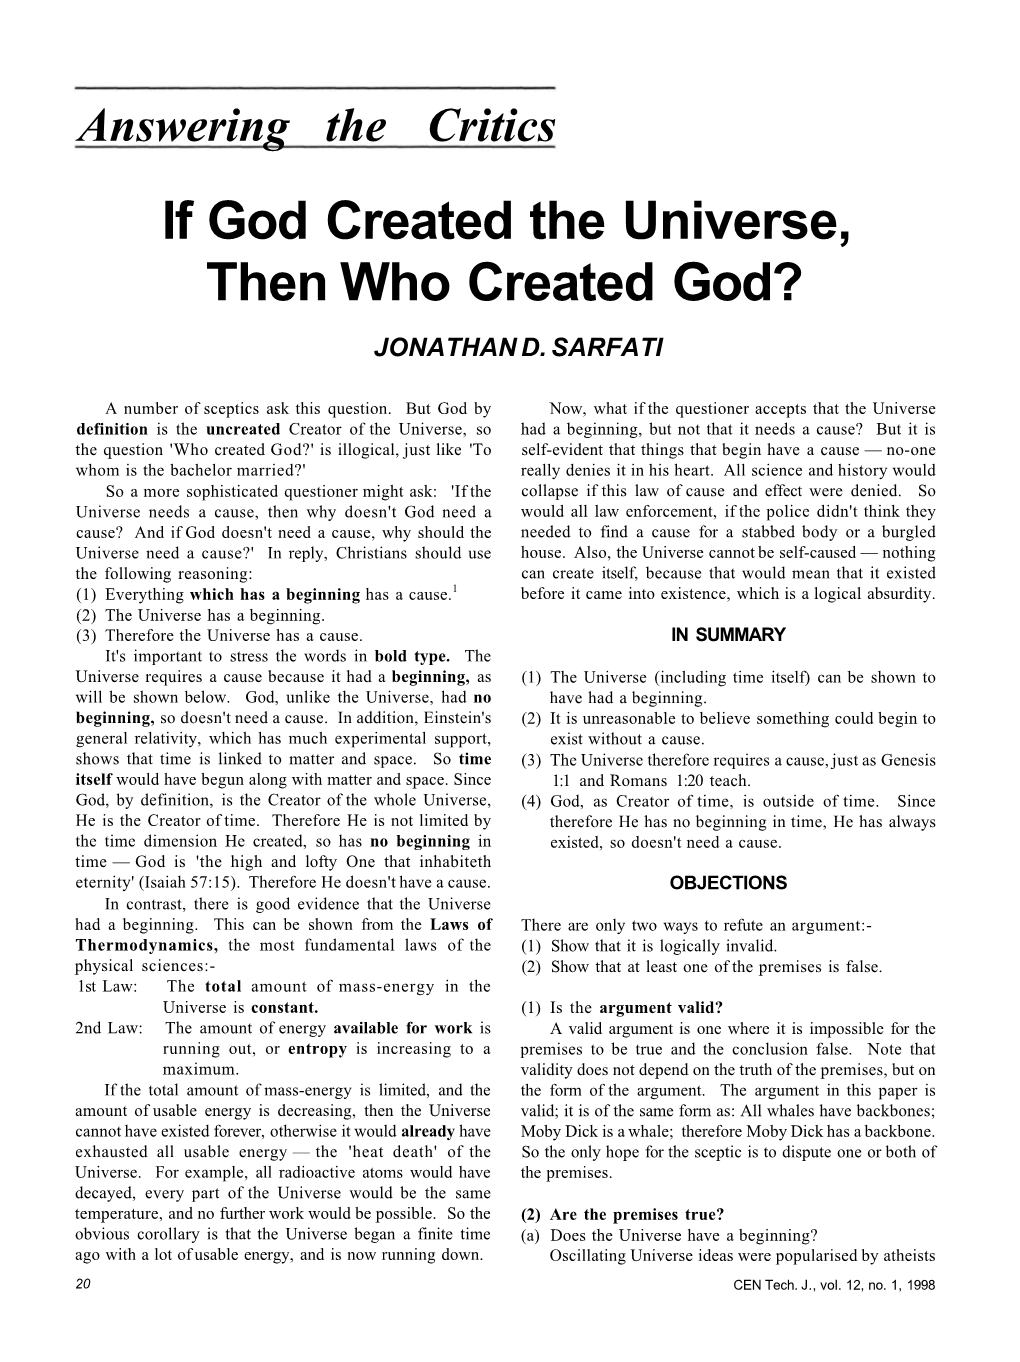 If God Created the Universe, Then Who Created God? JONATHAN D